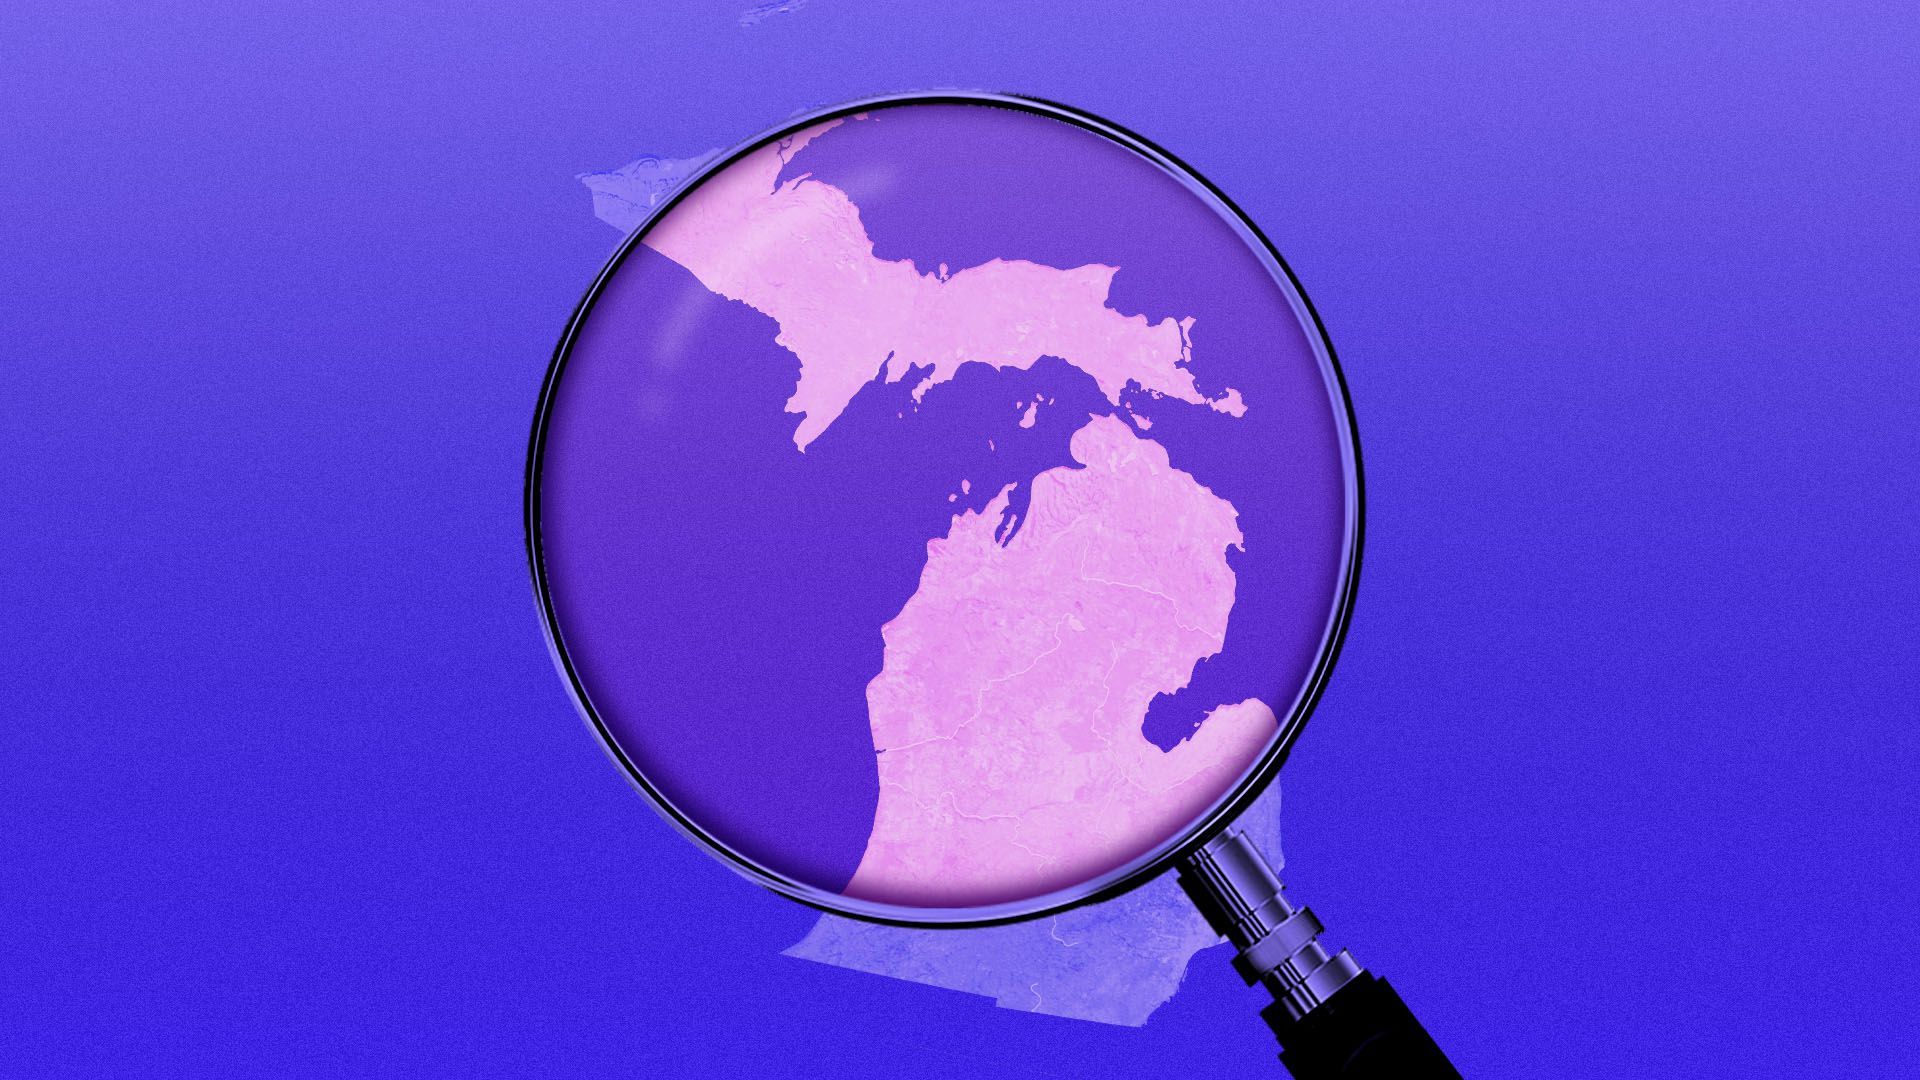 Illustration of a magnifying glass examining the state of Michigan